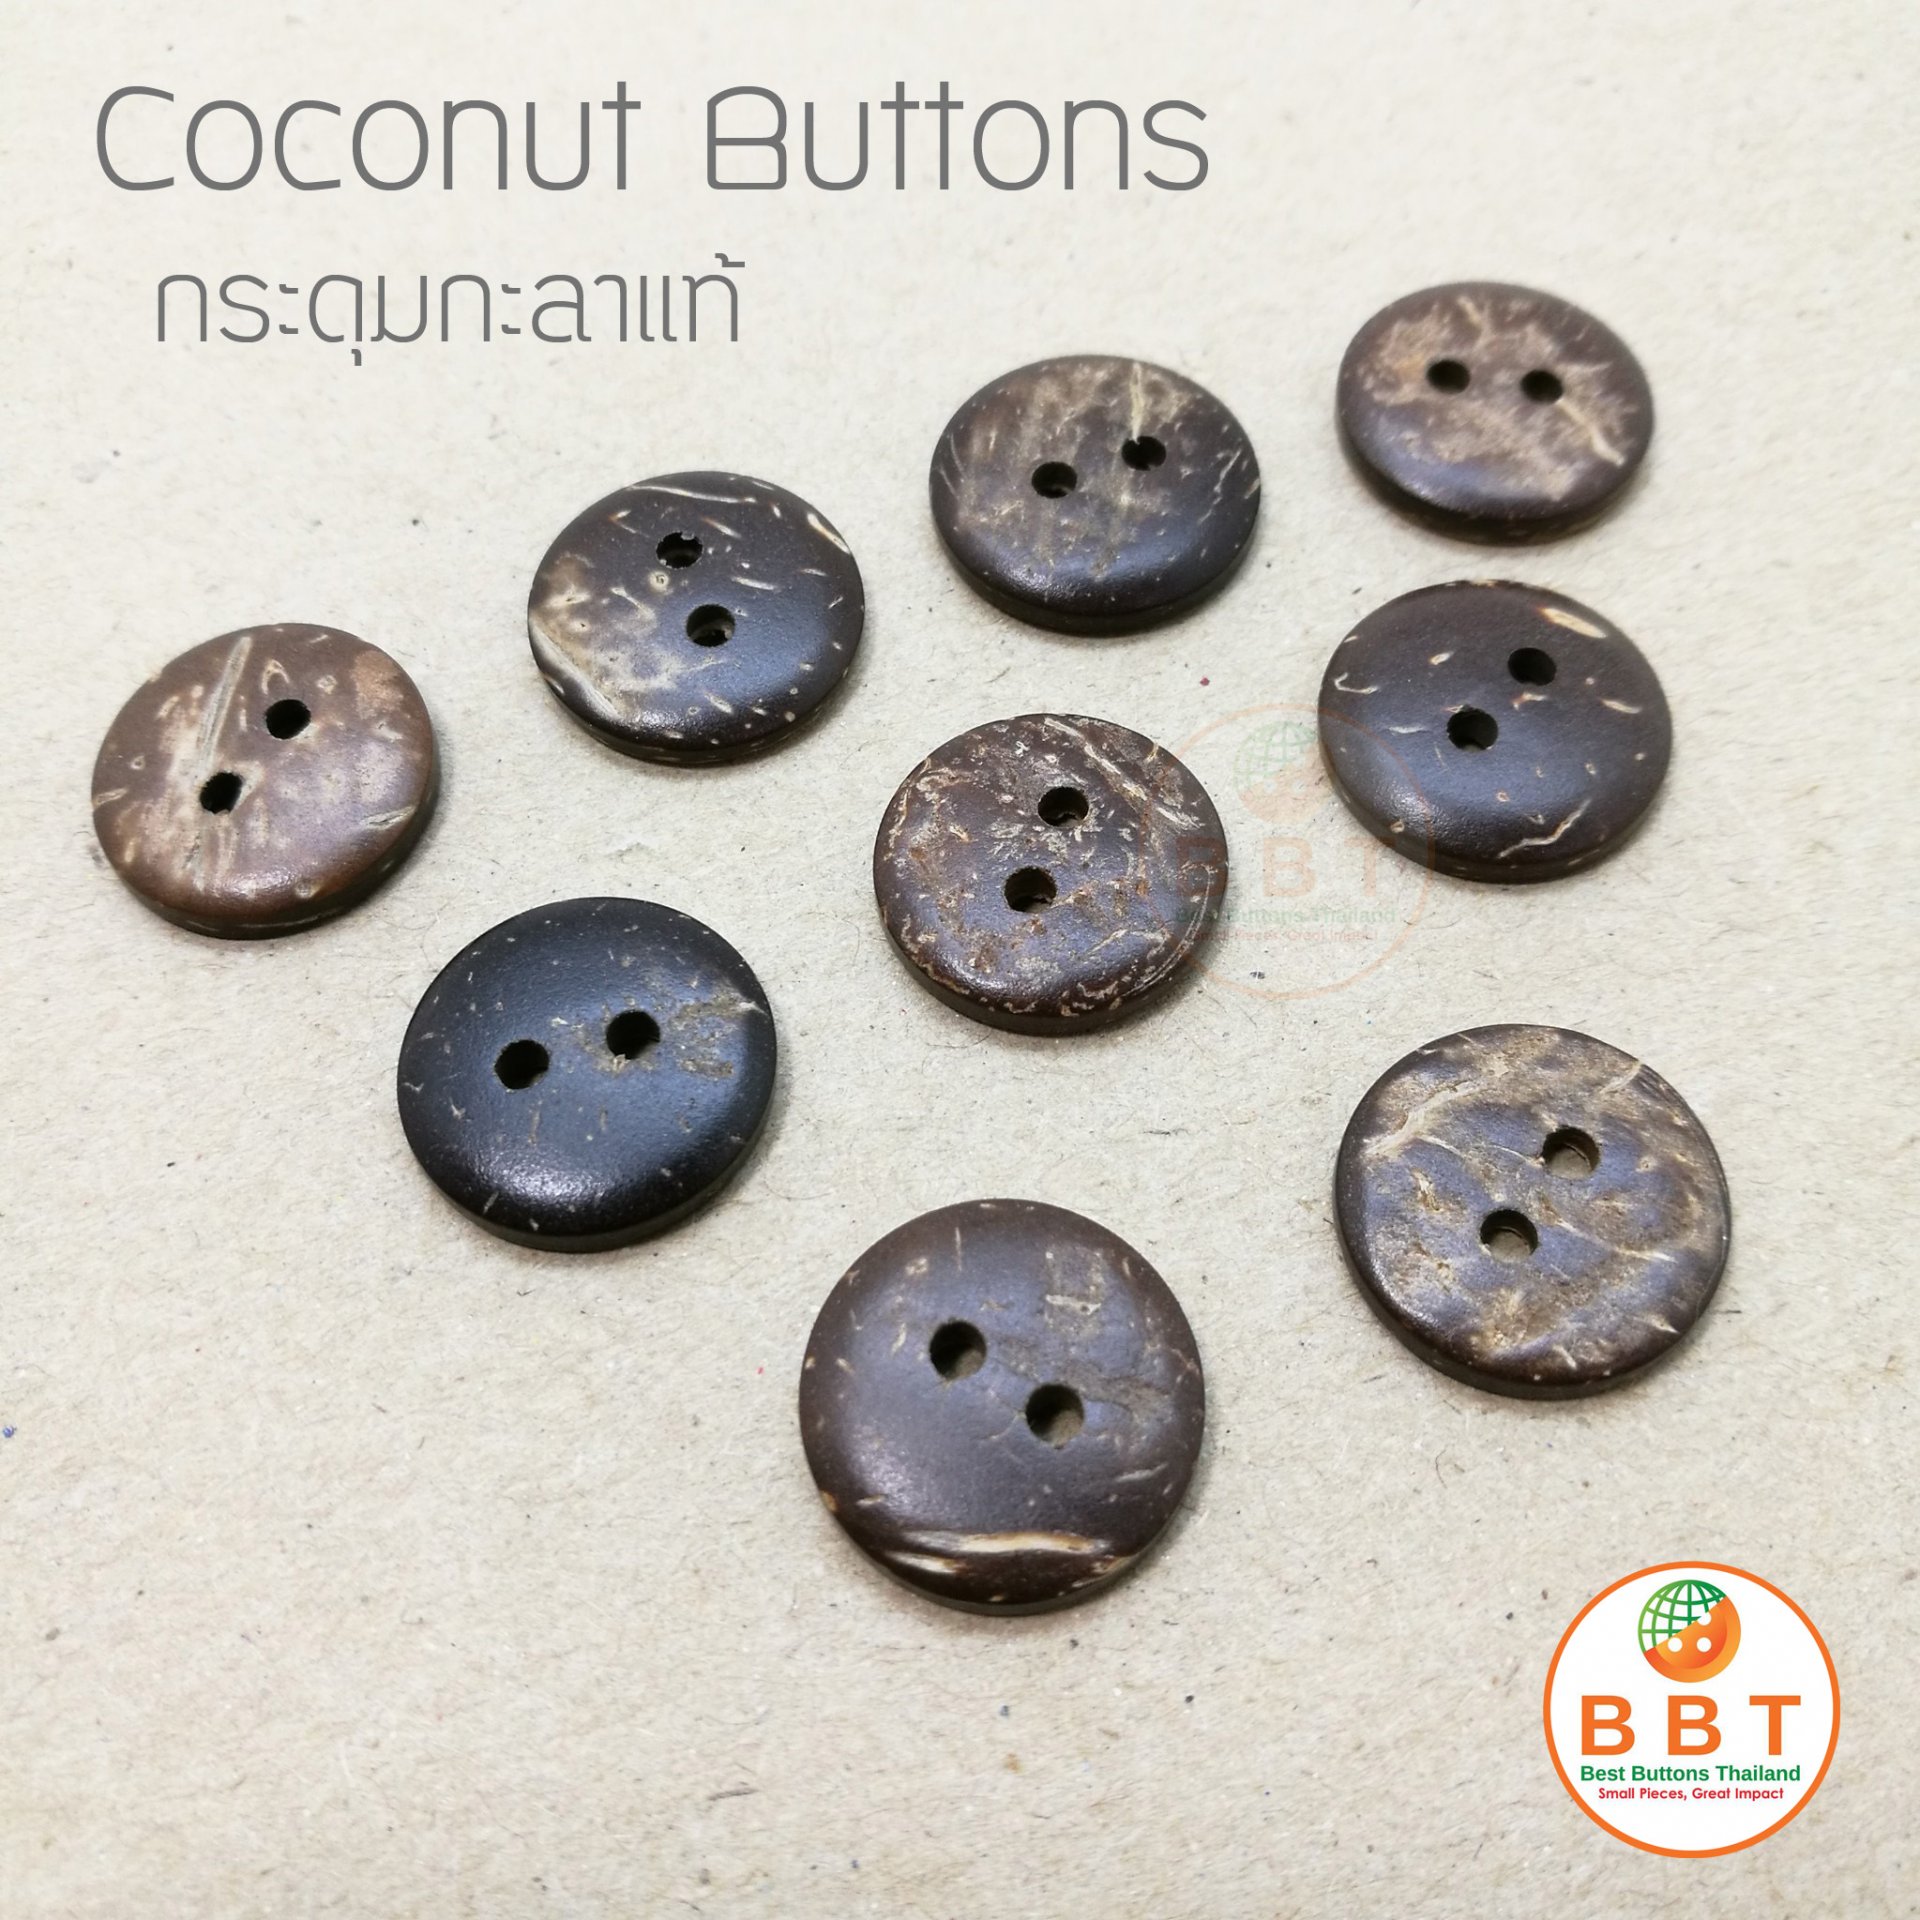 Coconut Buttons Size 13mm.